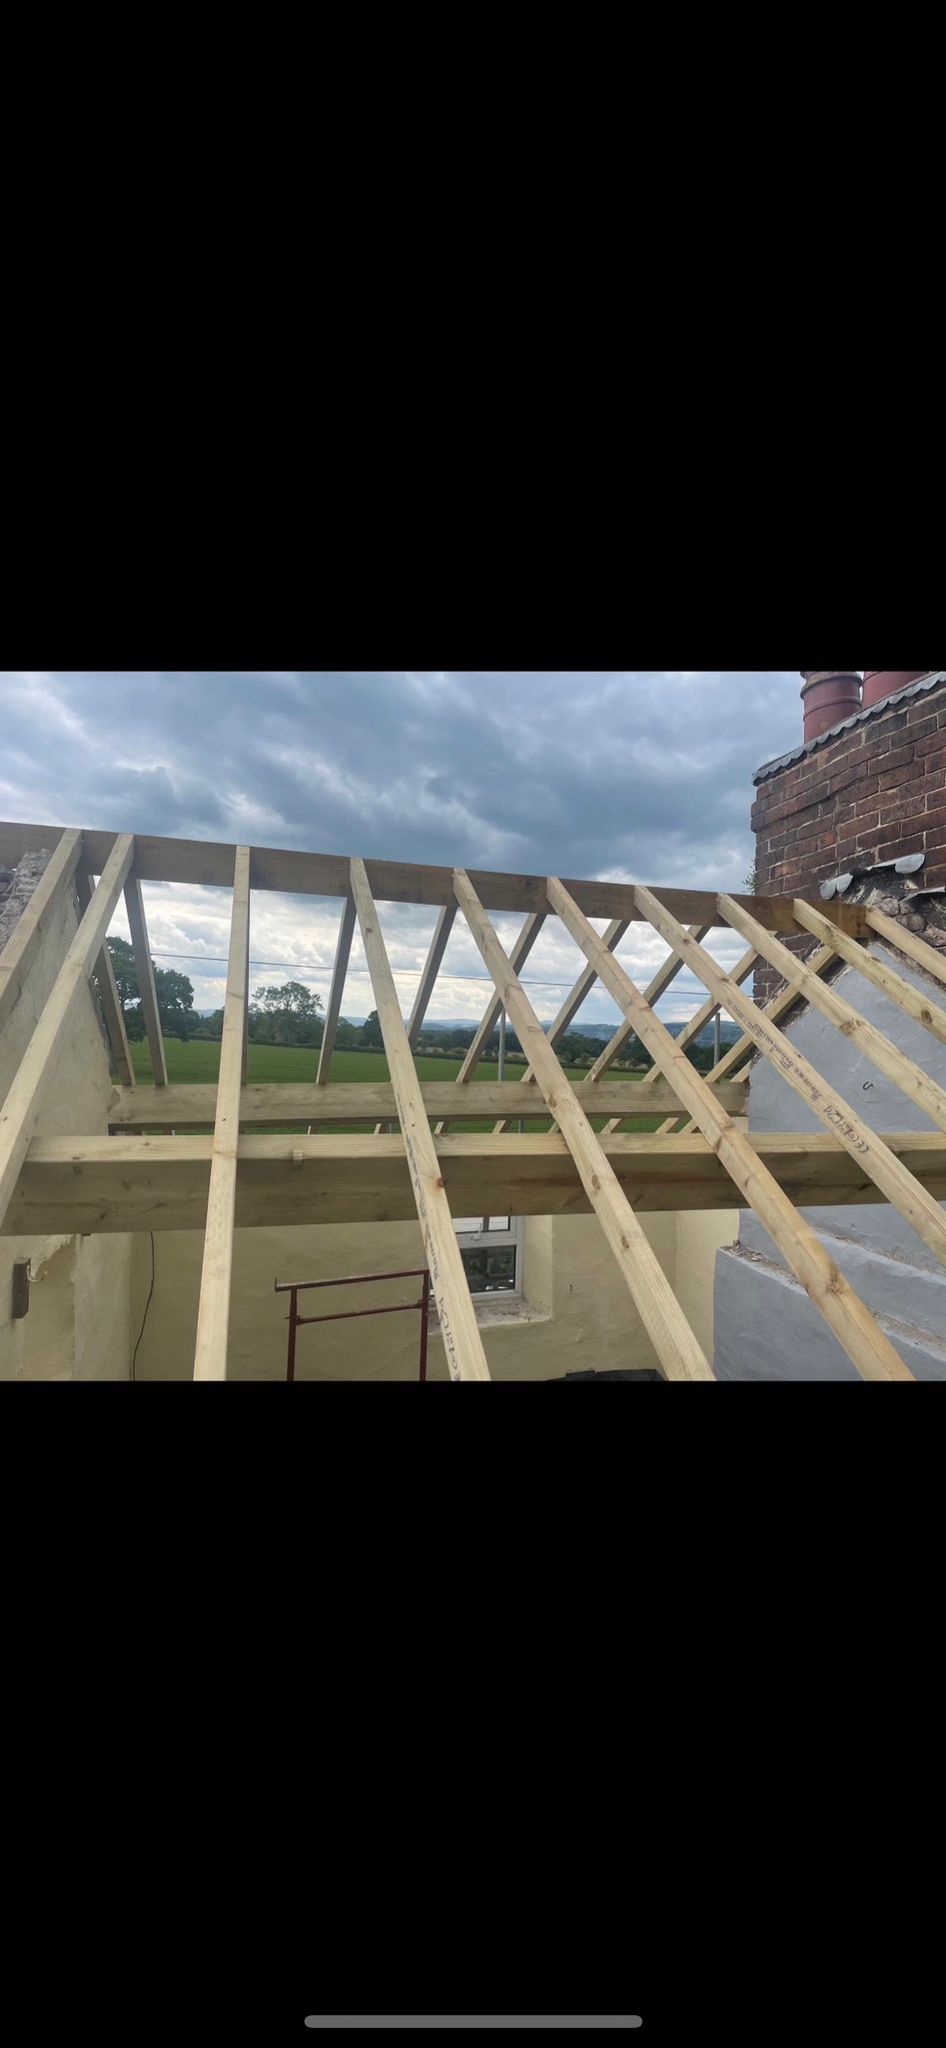 Timberwork Roof Contractors Ridleywood, LL13 - DD Roofing